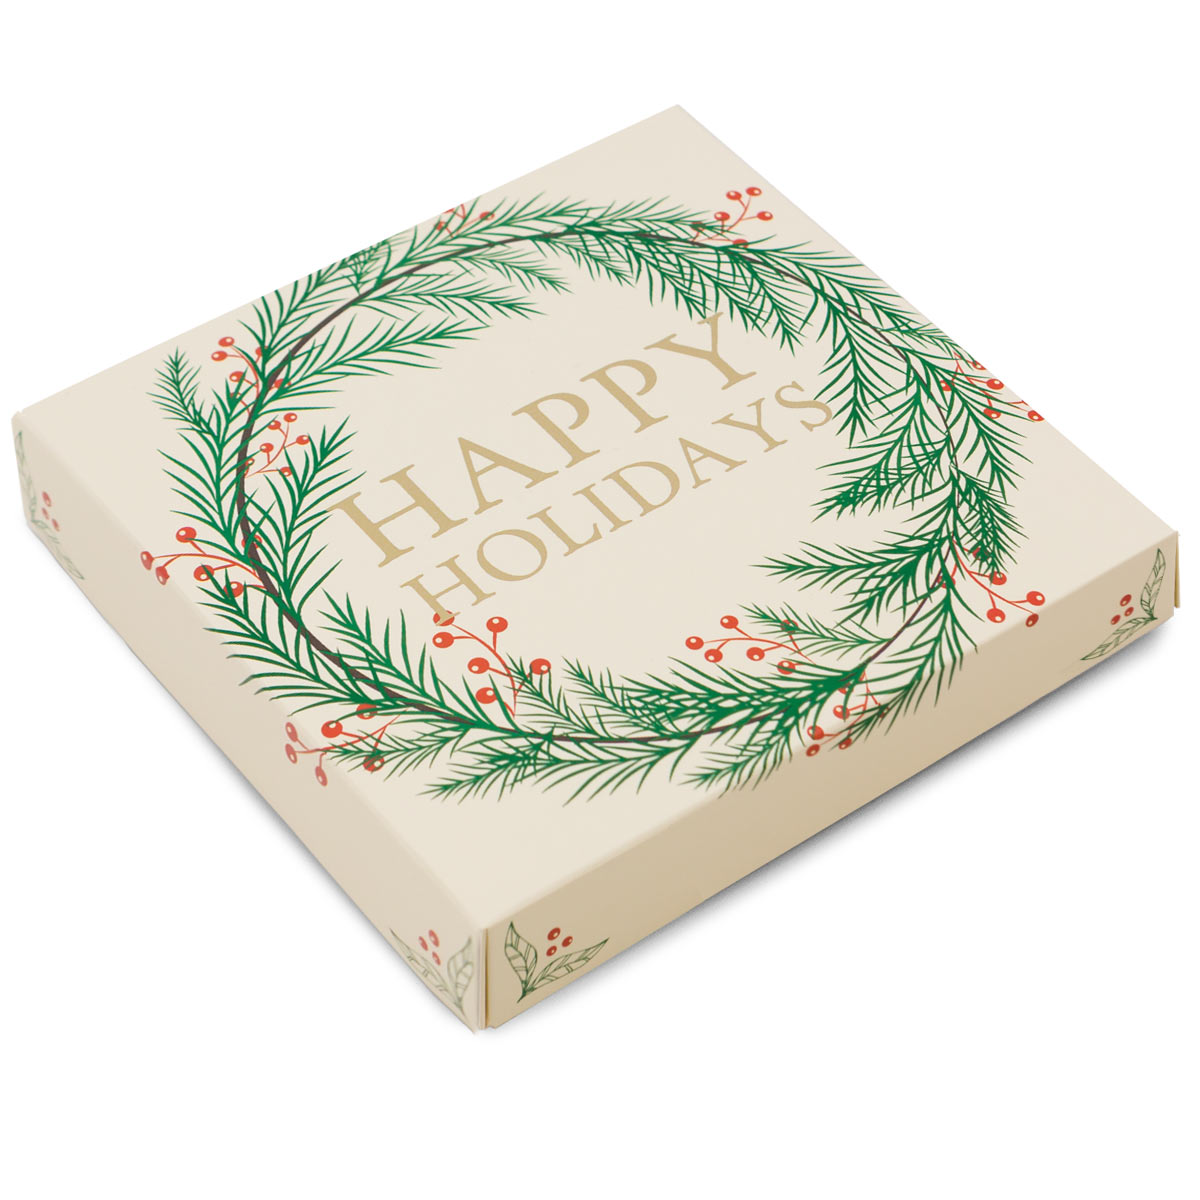 Happy Holidays Gift Box with assorted chocolates Sugar Free